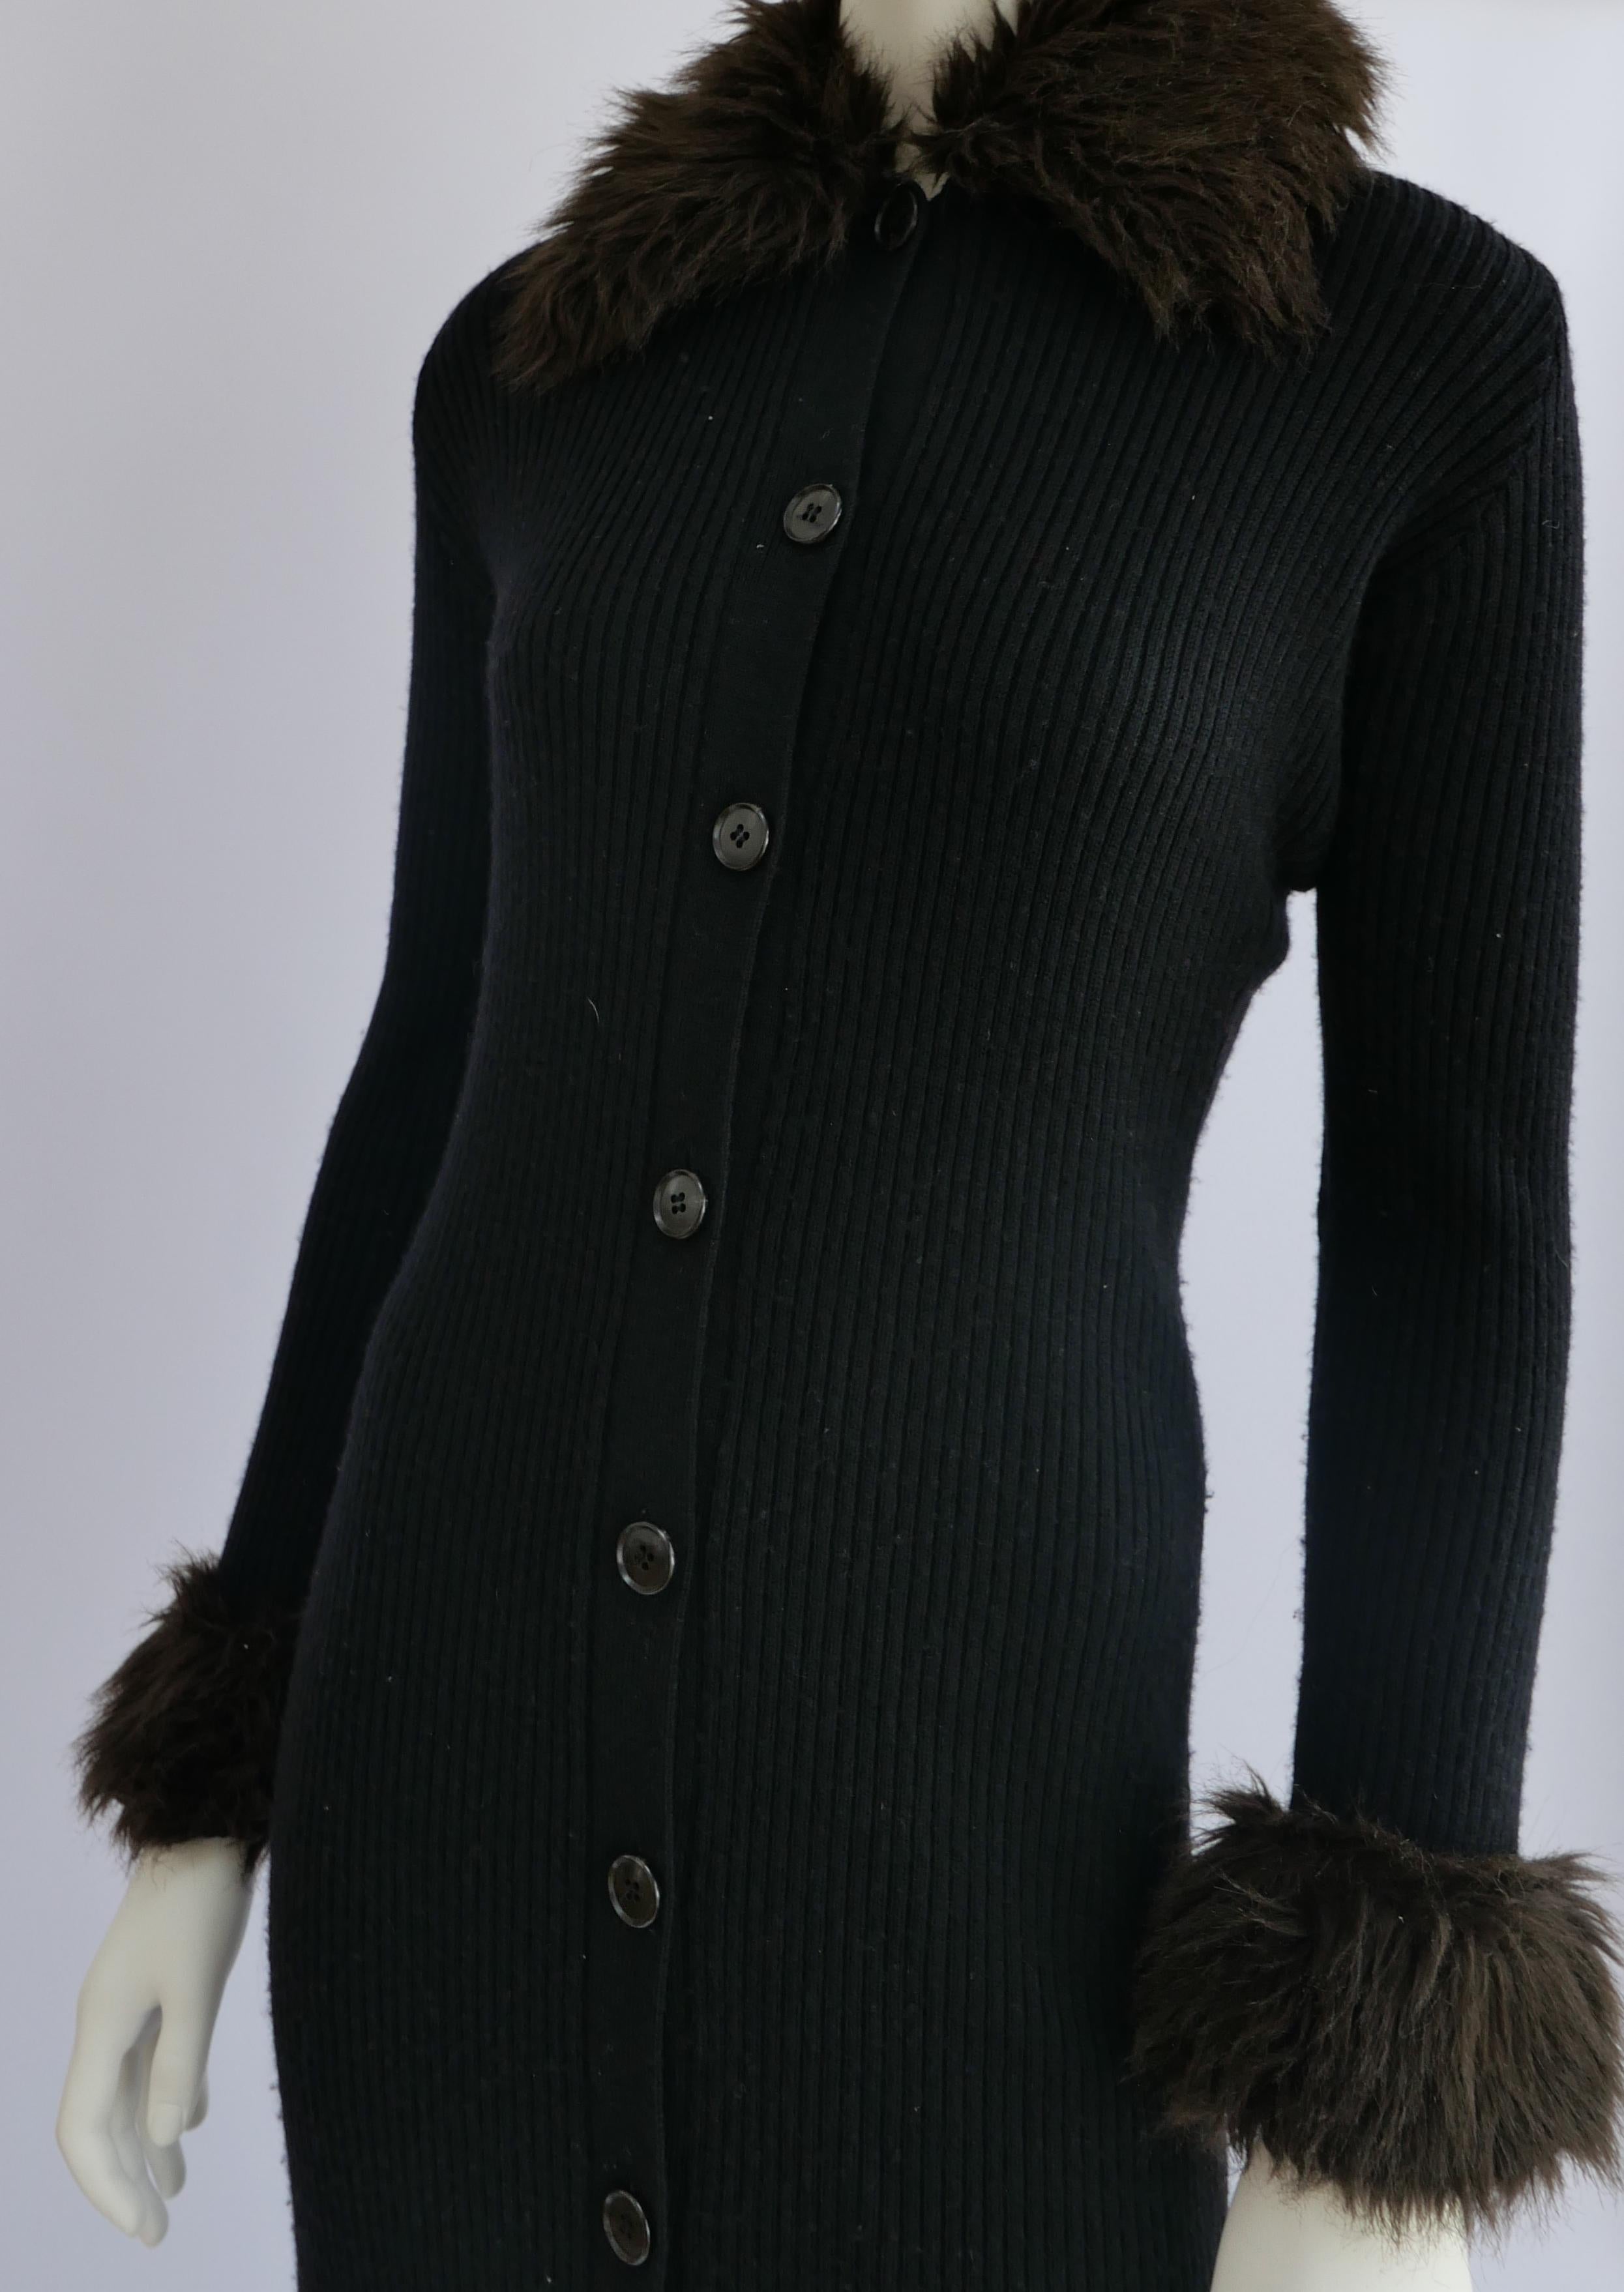 JEAN PAUL Gaultier Long Cardigan With Fur Trim Collar and Cuffs
Elegant long Jean Paul Gaultier wool cardigan with button fastenings. Jean Paul Gaultier is a French haute couture and prêt-à-porter fashion designer. He is described as an 